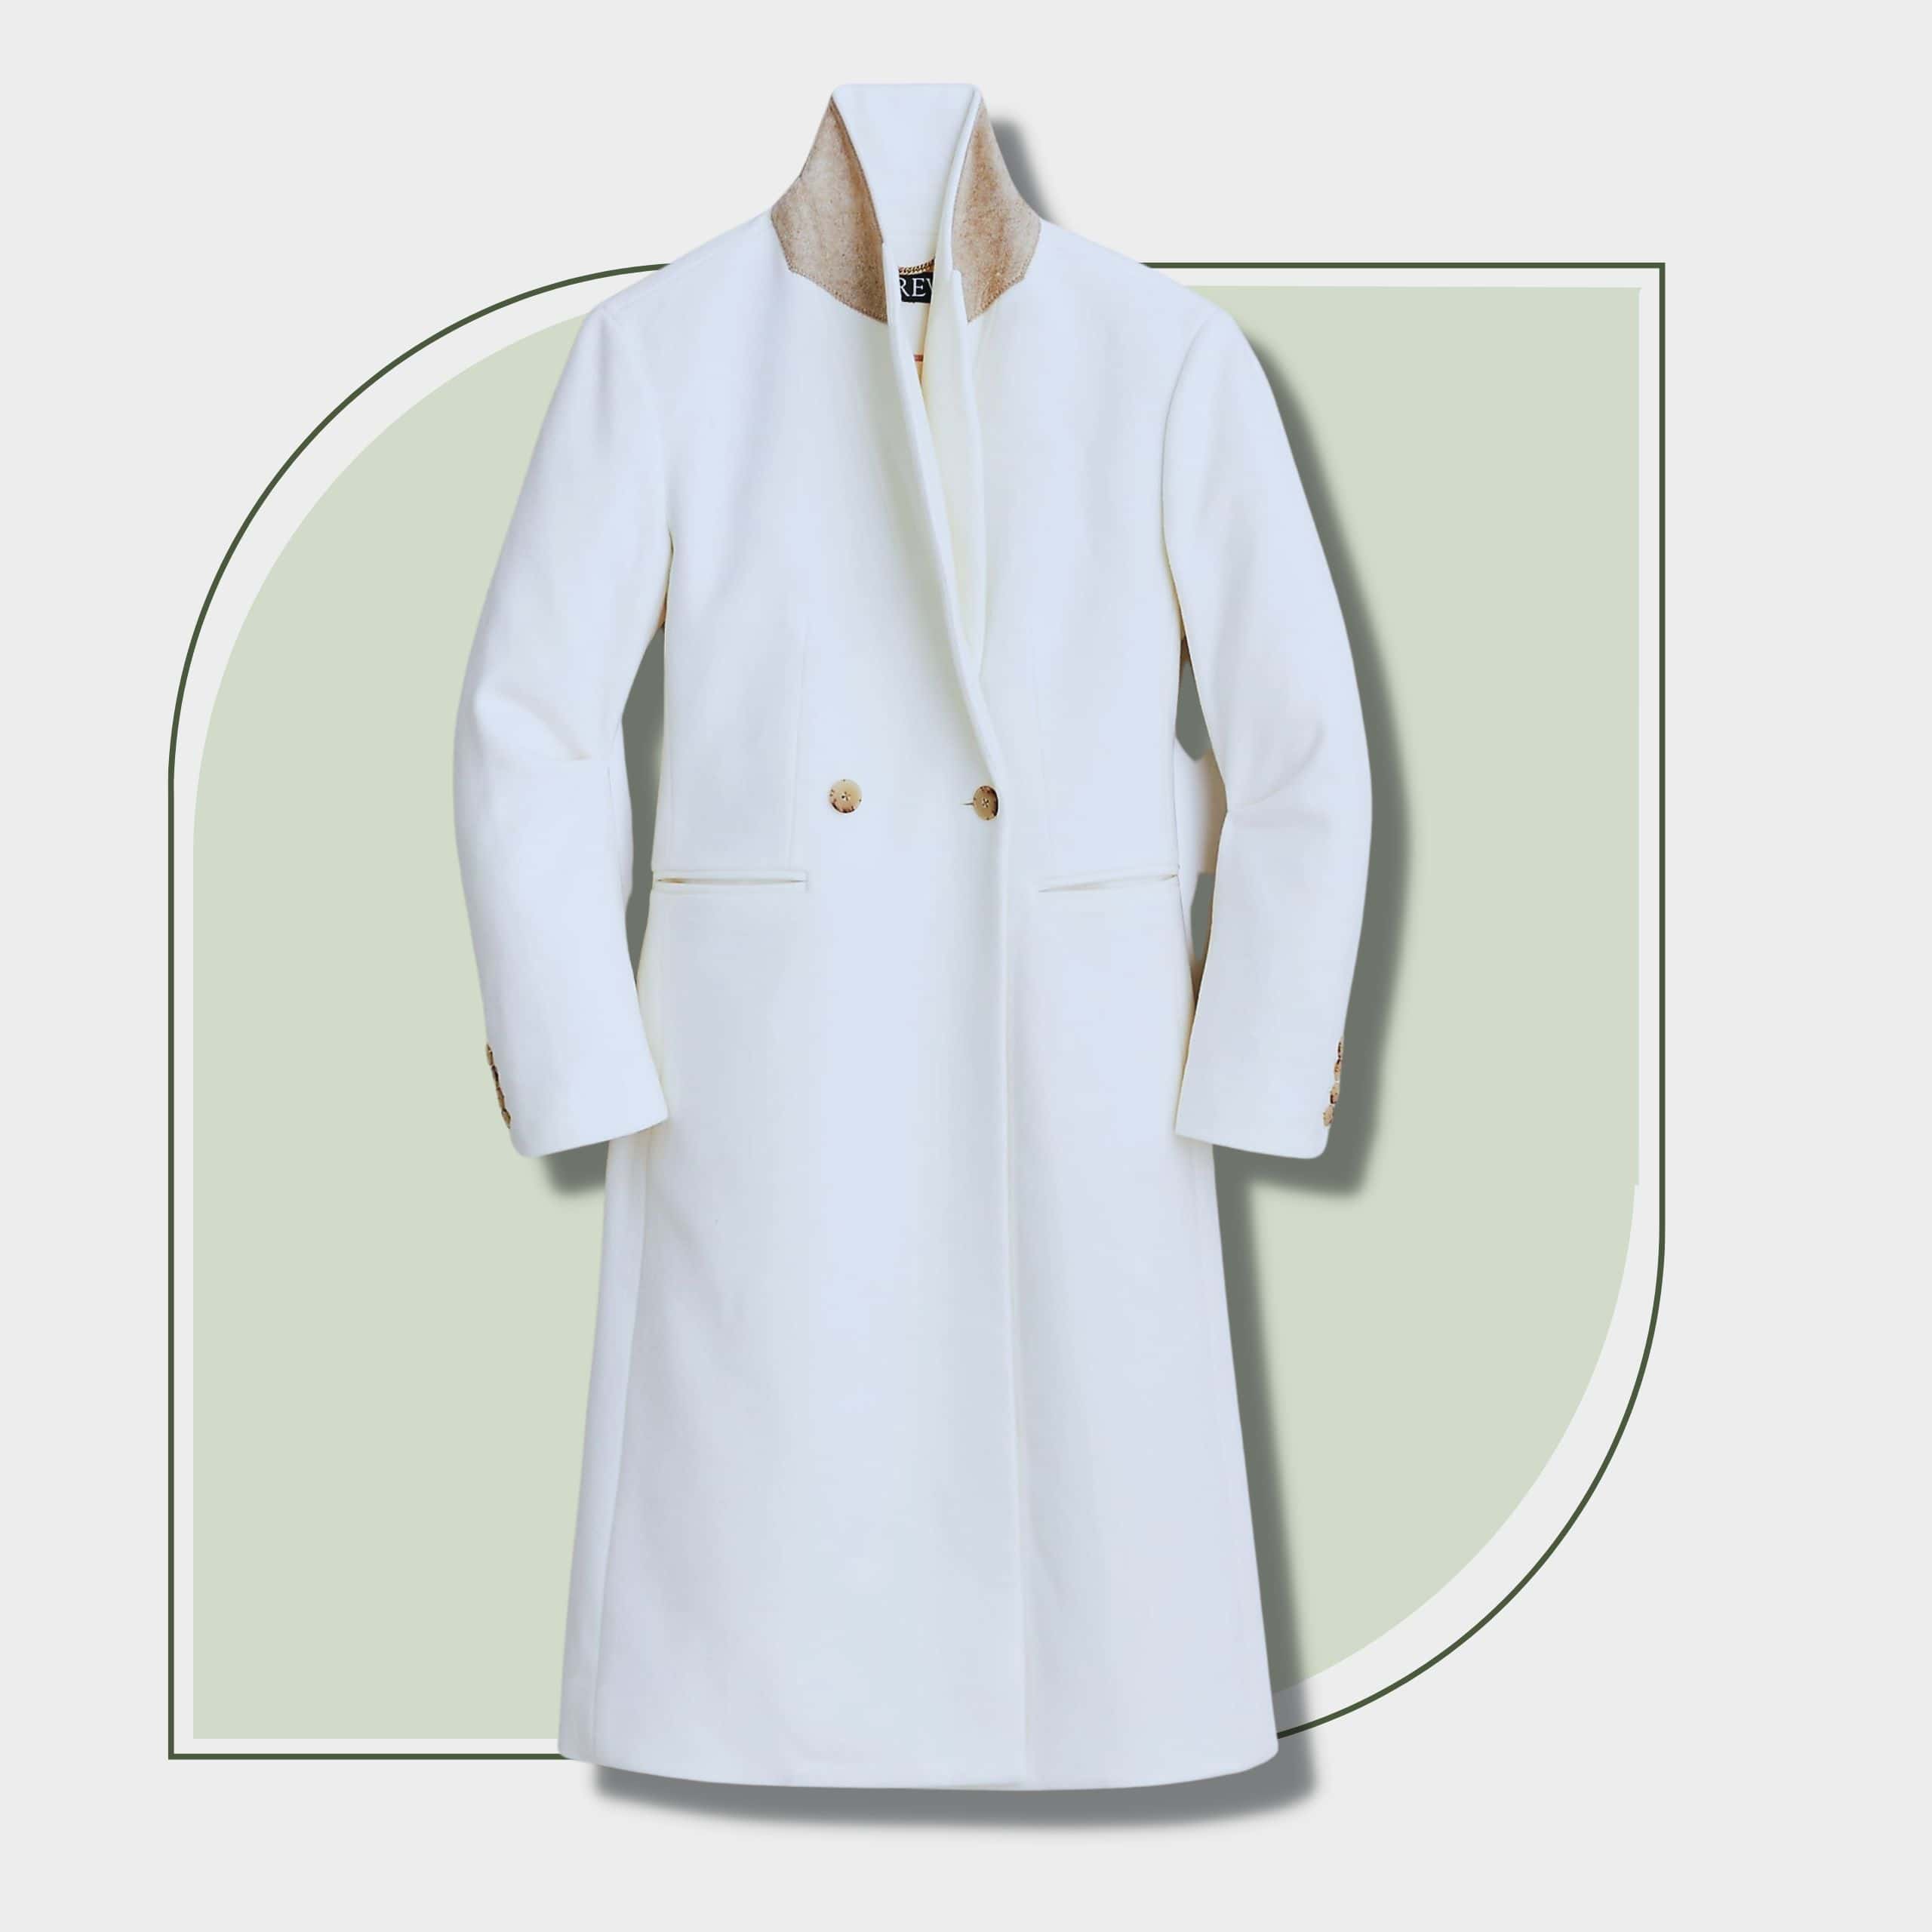 Effortless Chic Winter Capsule Wardrobe-Structured White Coat